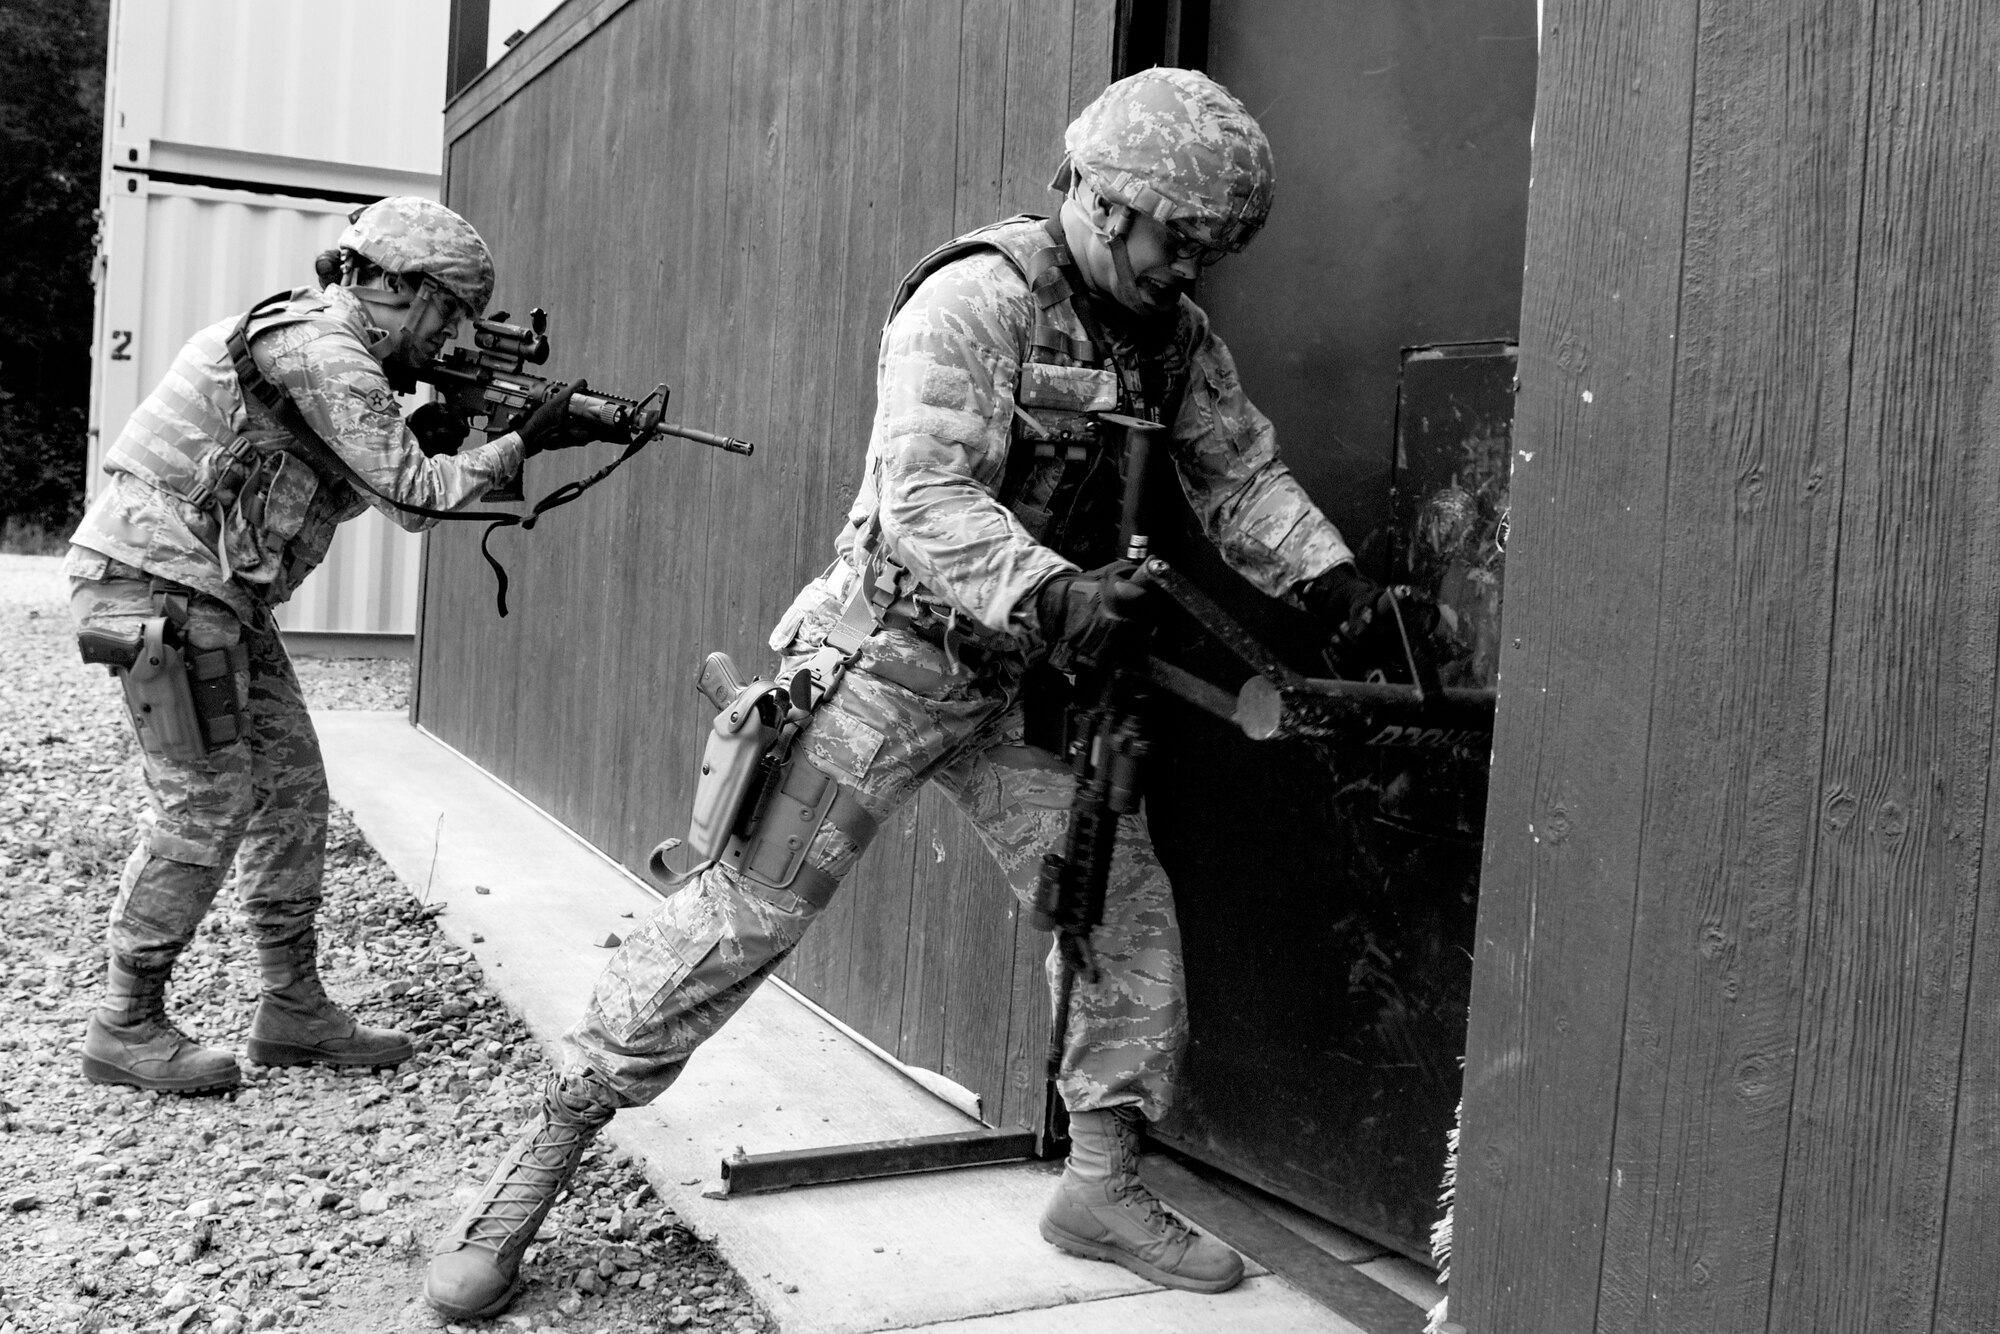 Airman 1st Class Alex Westin, 4th Security Forces Squadron defender, rams a door while Airman Mia Rus, 4th SFS defender, watches his back during a shoot competition, May 17, 2016, at Seymour Johnson Air Force Base, North Carolina. Two-man teams cleared an Urban Tactical Training Area building while eliminating simulated targets for time and points. (U.S. Air Force photo by Airman Shawna L. Keyes/Released)